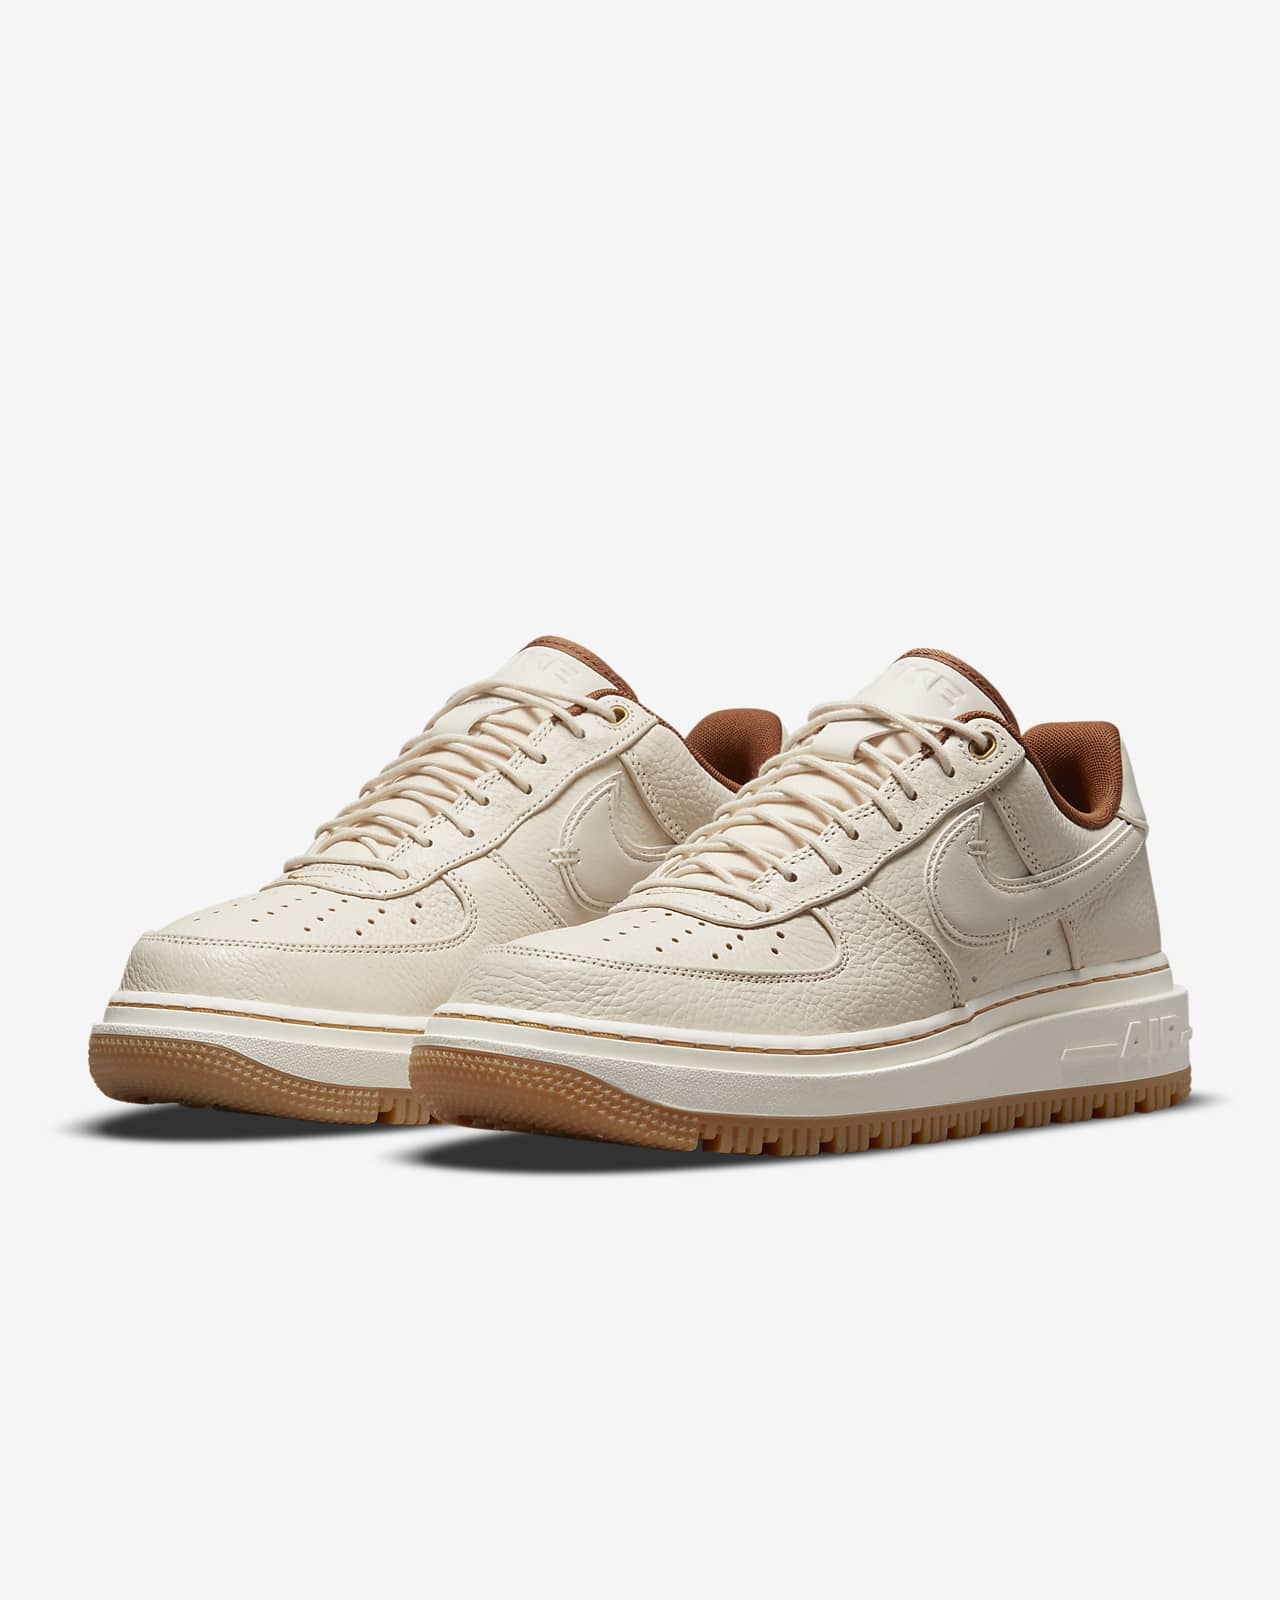 nike air force 1 mens trainers